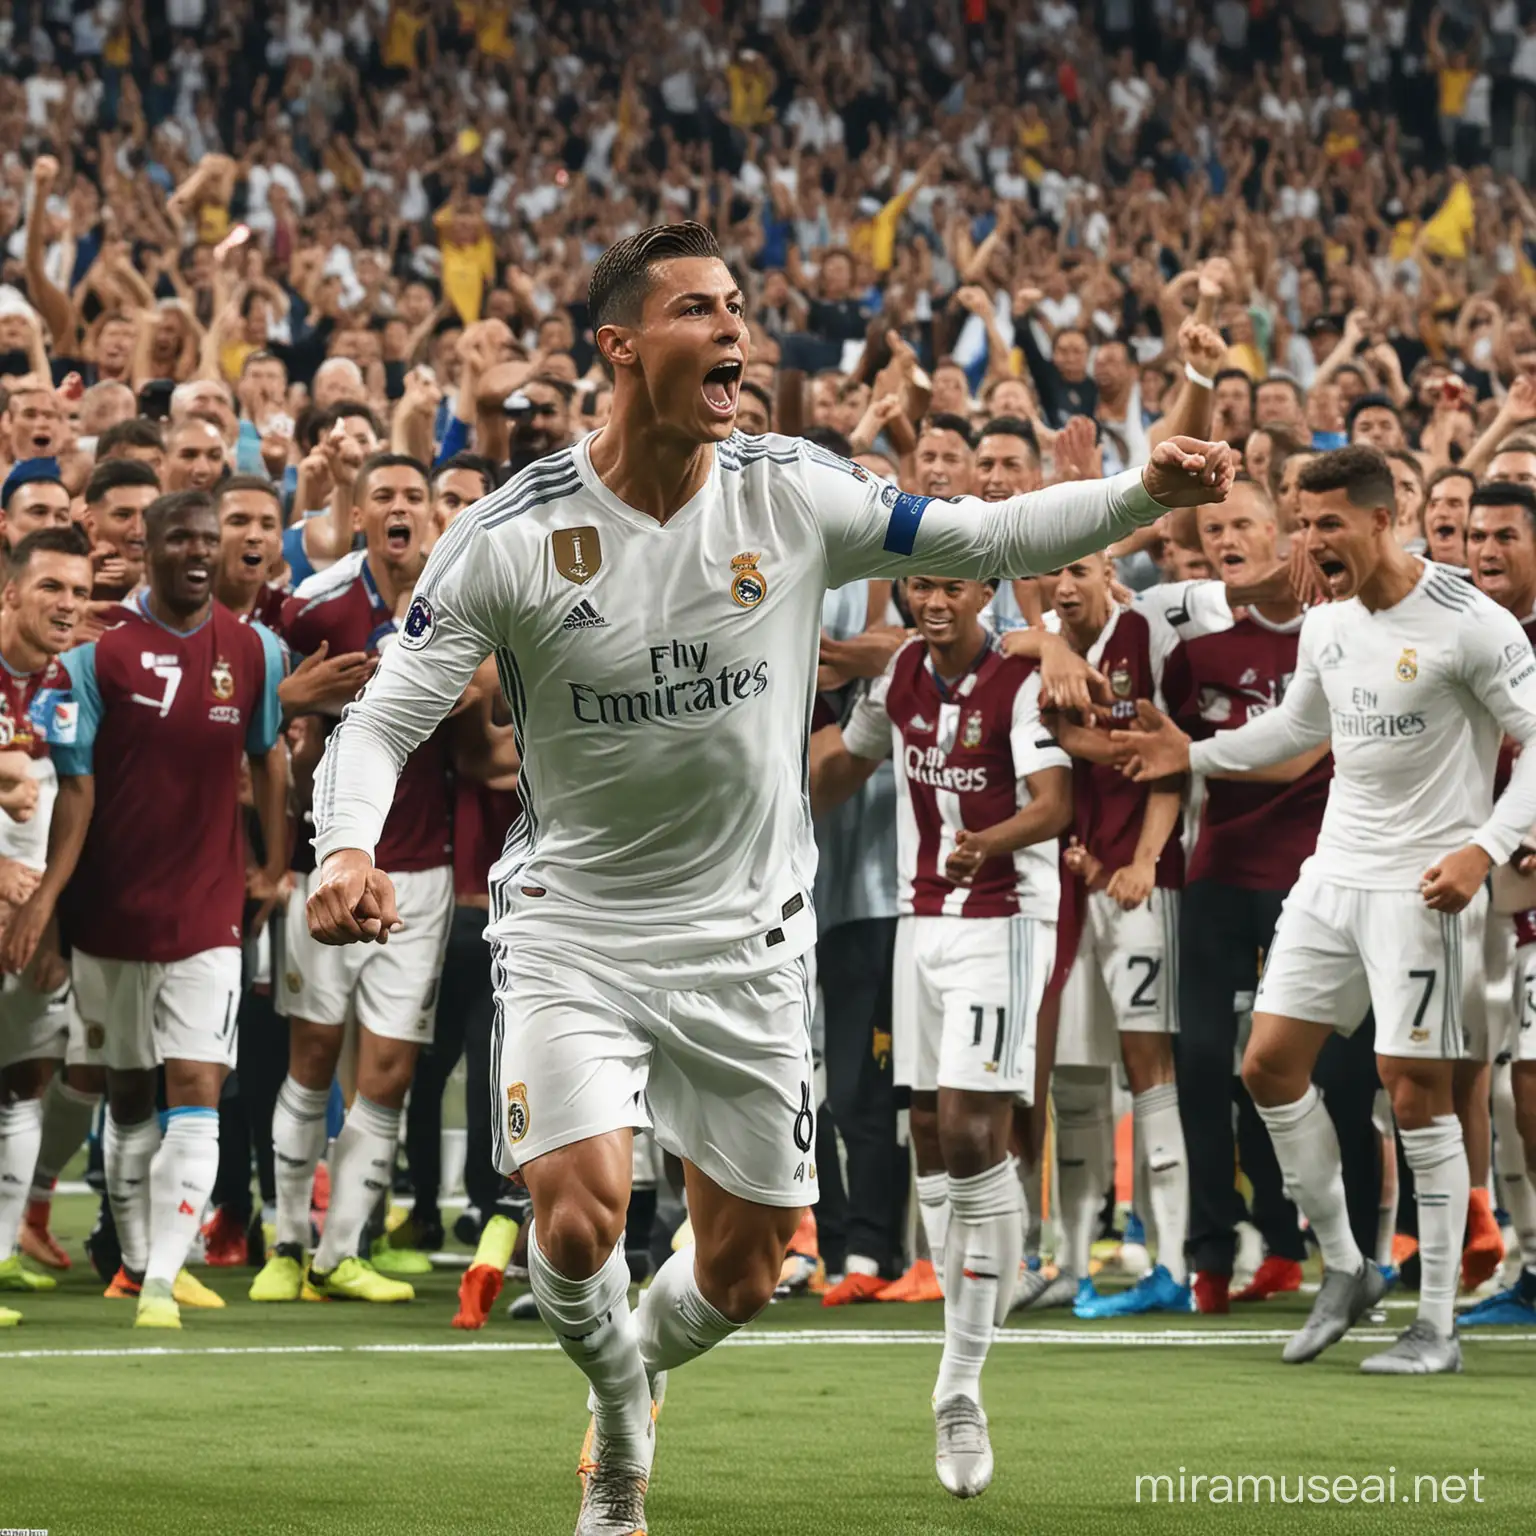 "8. Record-Breaking Moment: Embody the pride and accomplishment of breaking records, just like Cristiano Ronaldo's historic achievements on the playground."

